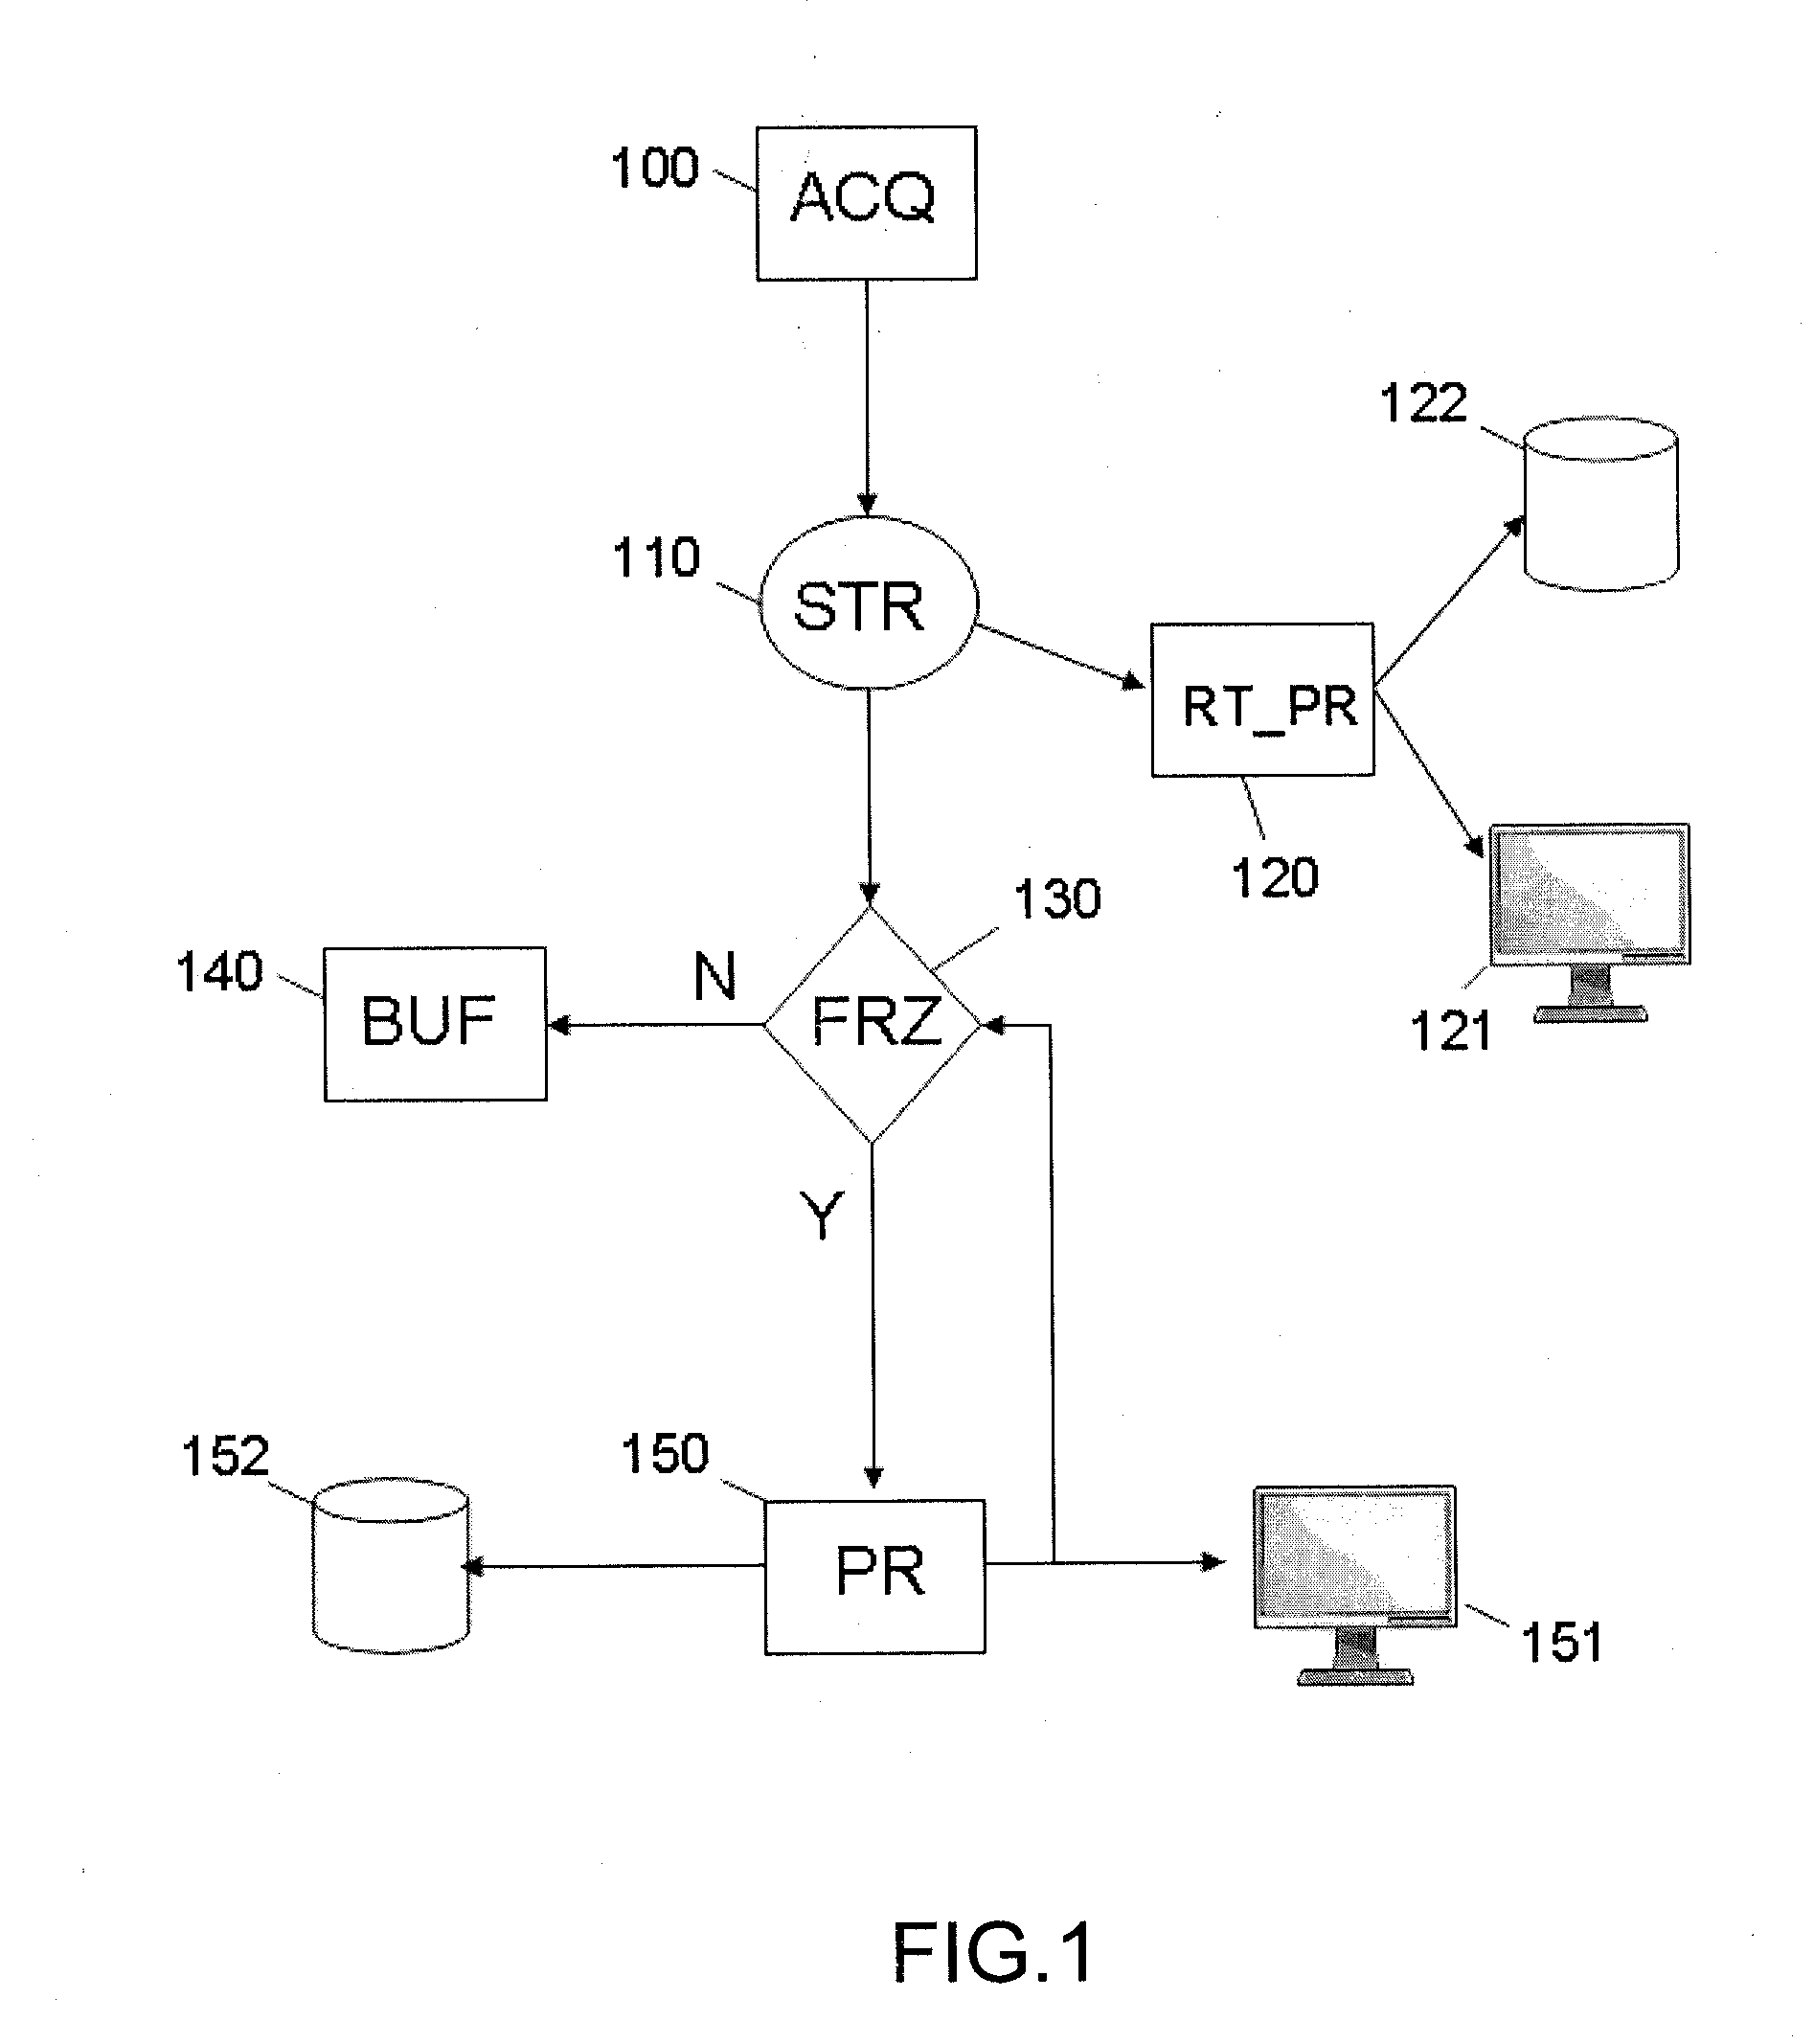 Method and system for processing images acquired in real time through a medical device